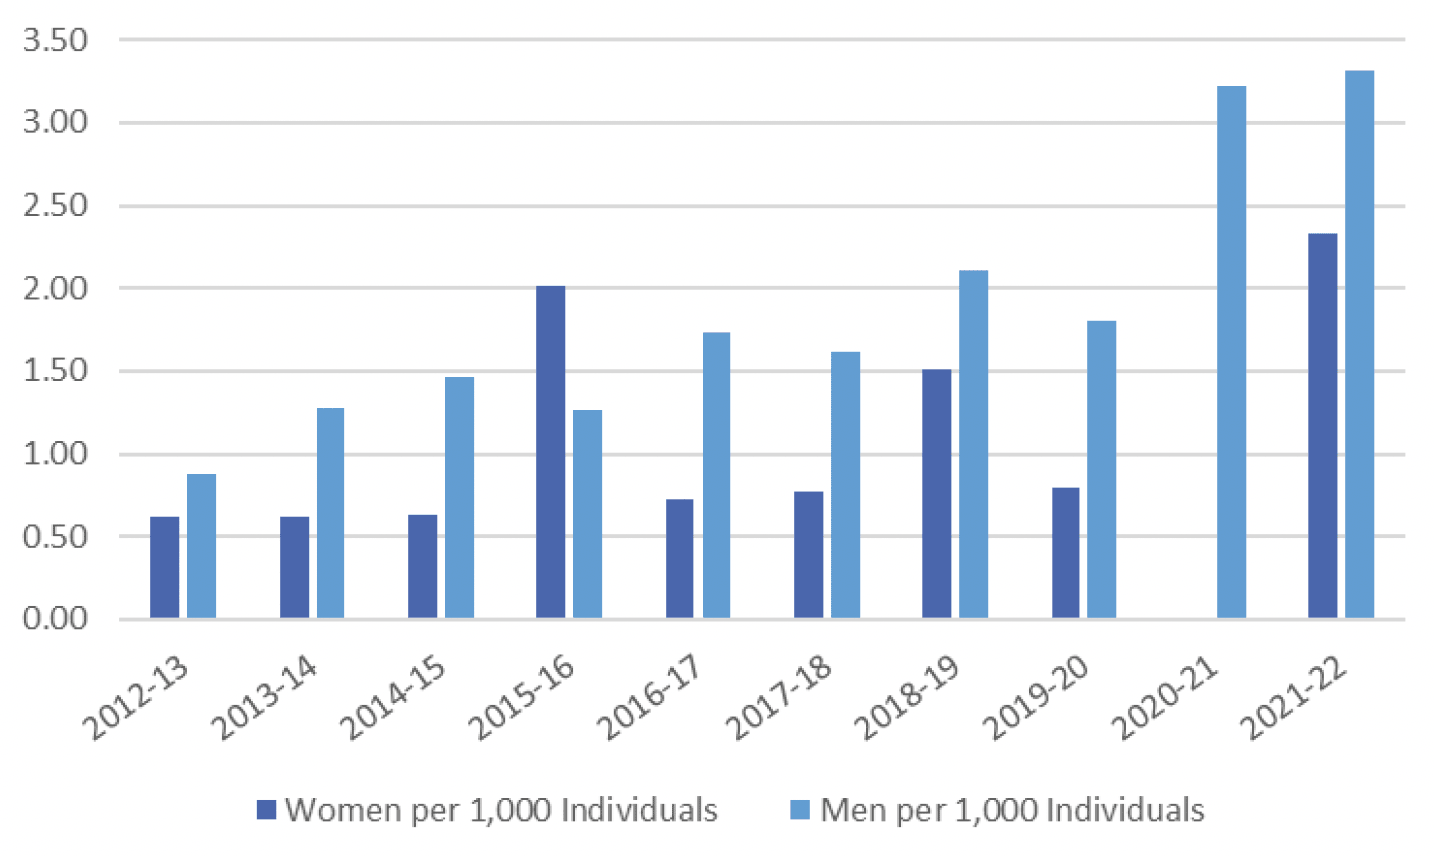 Bar chart showing the rate of death per 1,000 individuals for men and women. 